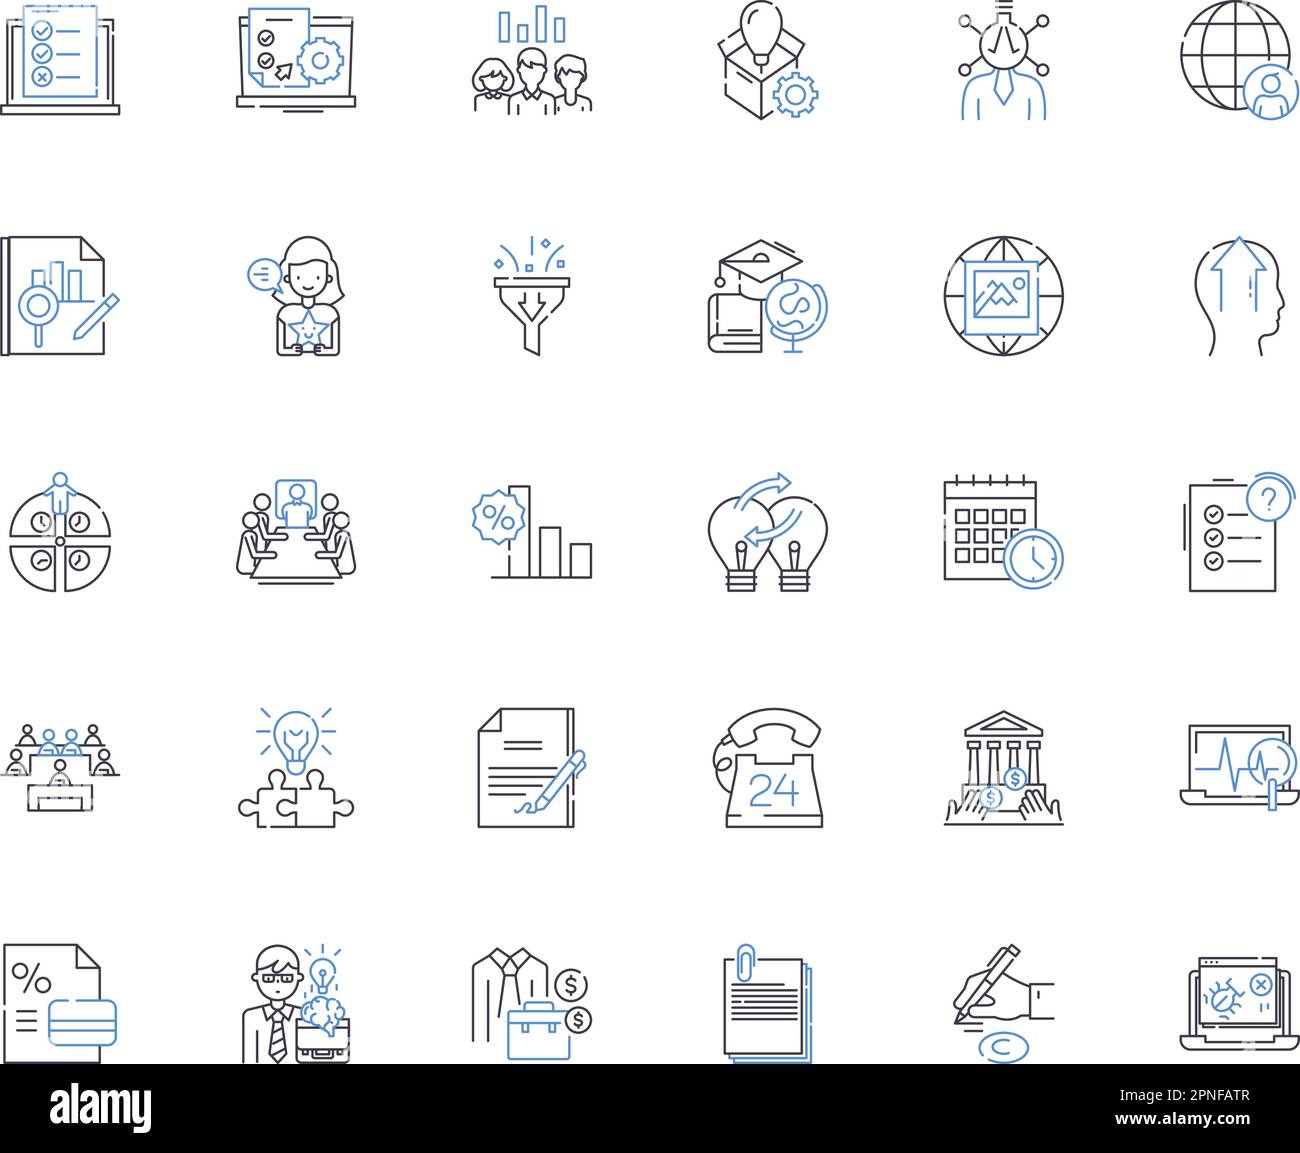 Workplace traditions line icons collection. Ritual, Etiquette, Protocol, Culture, Norms, Customs, Hierarchy vector and linear illustration. Formality Stock Vector